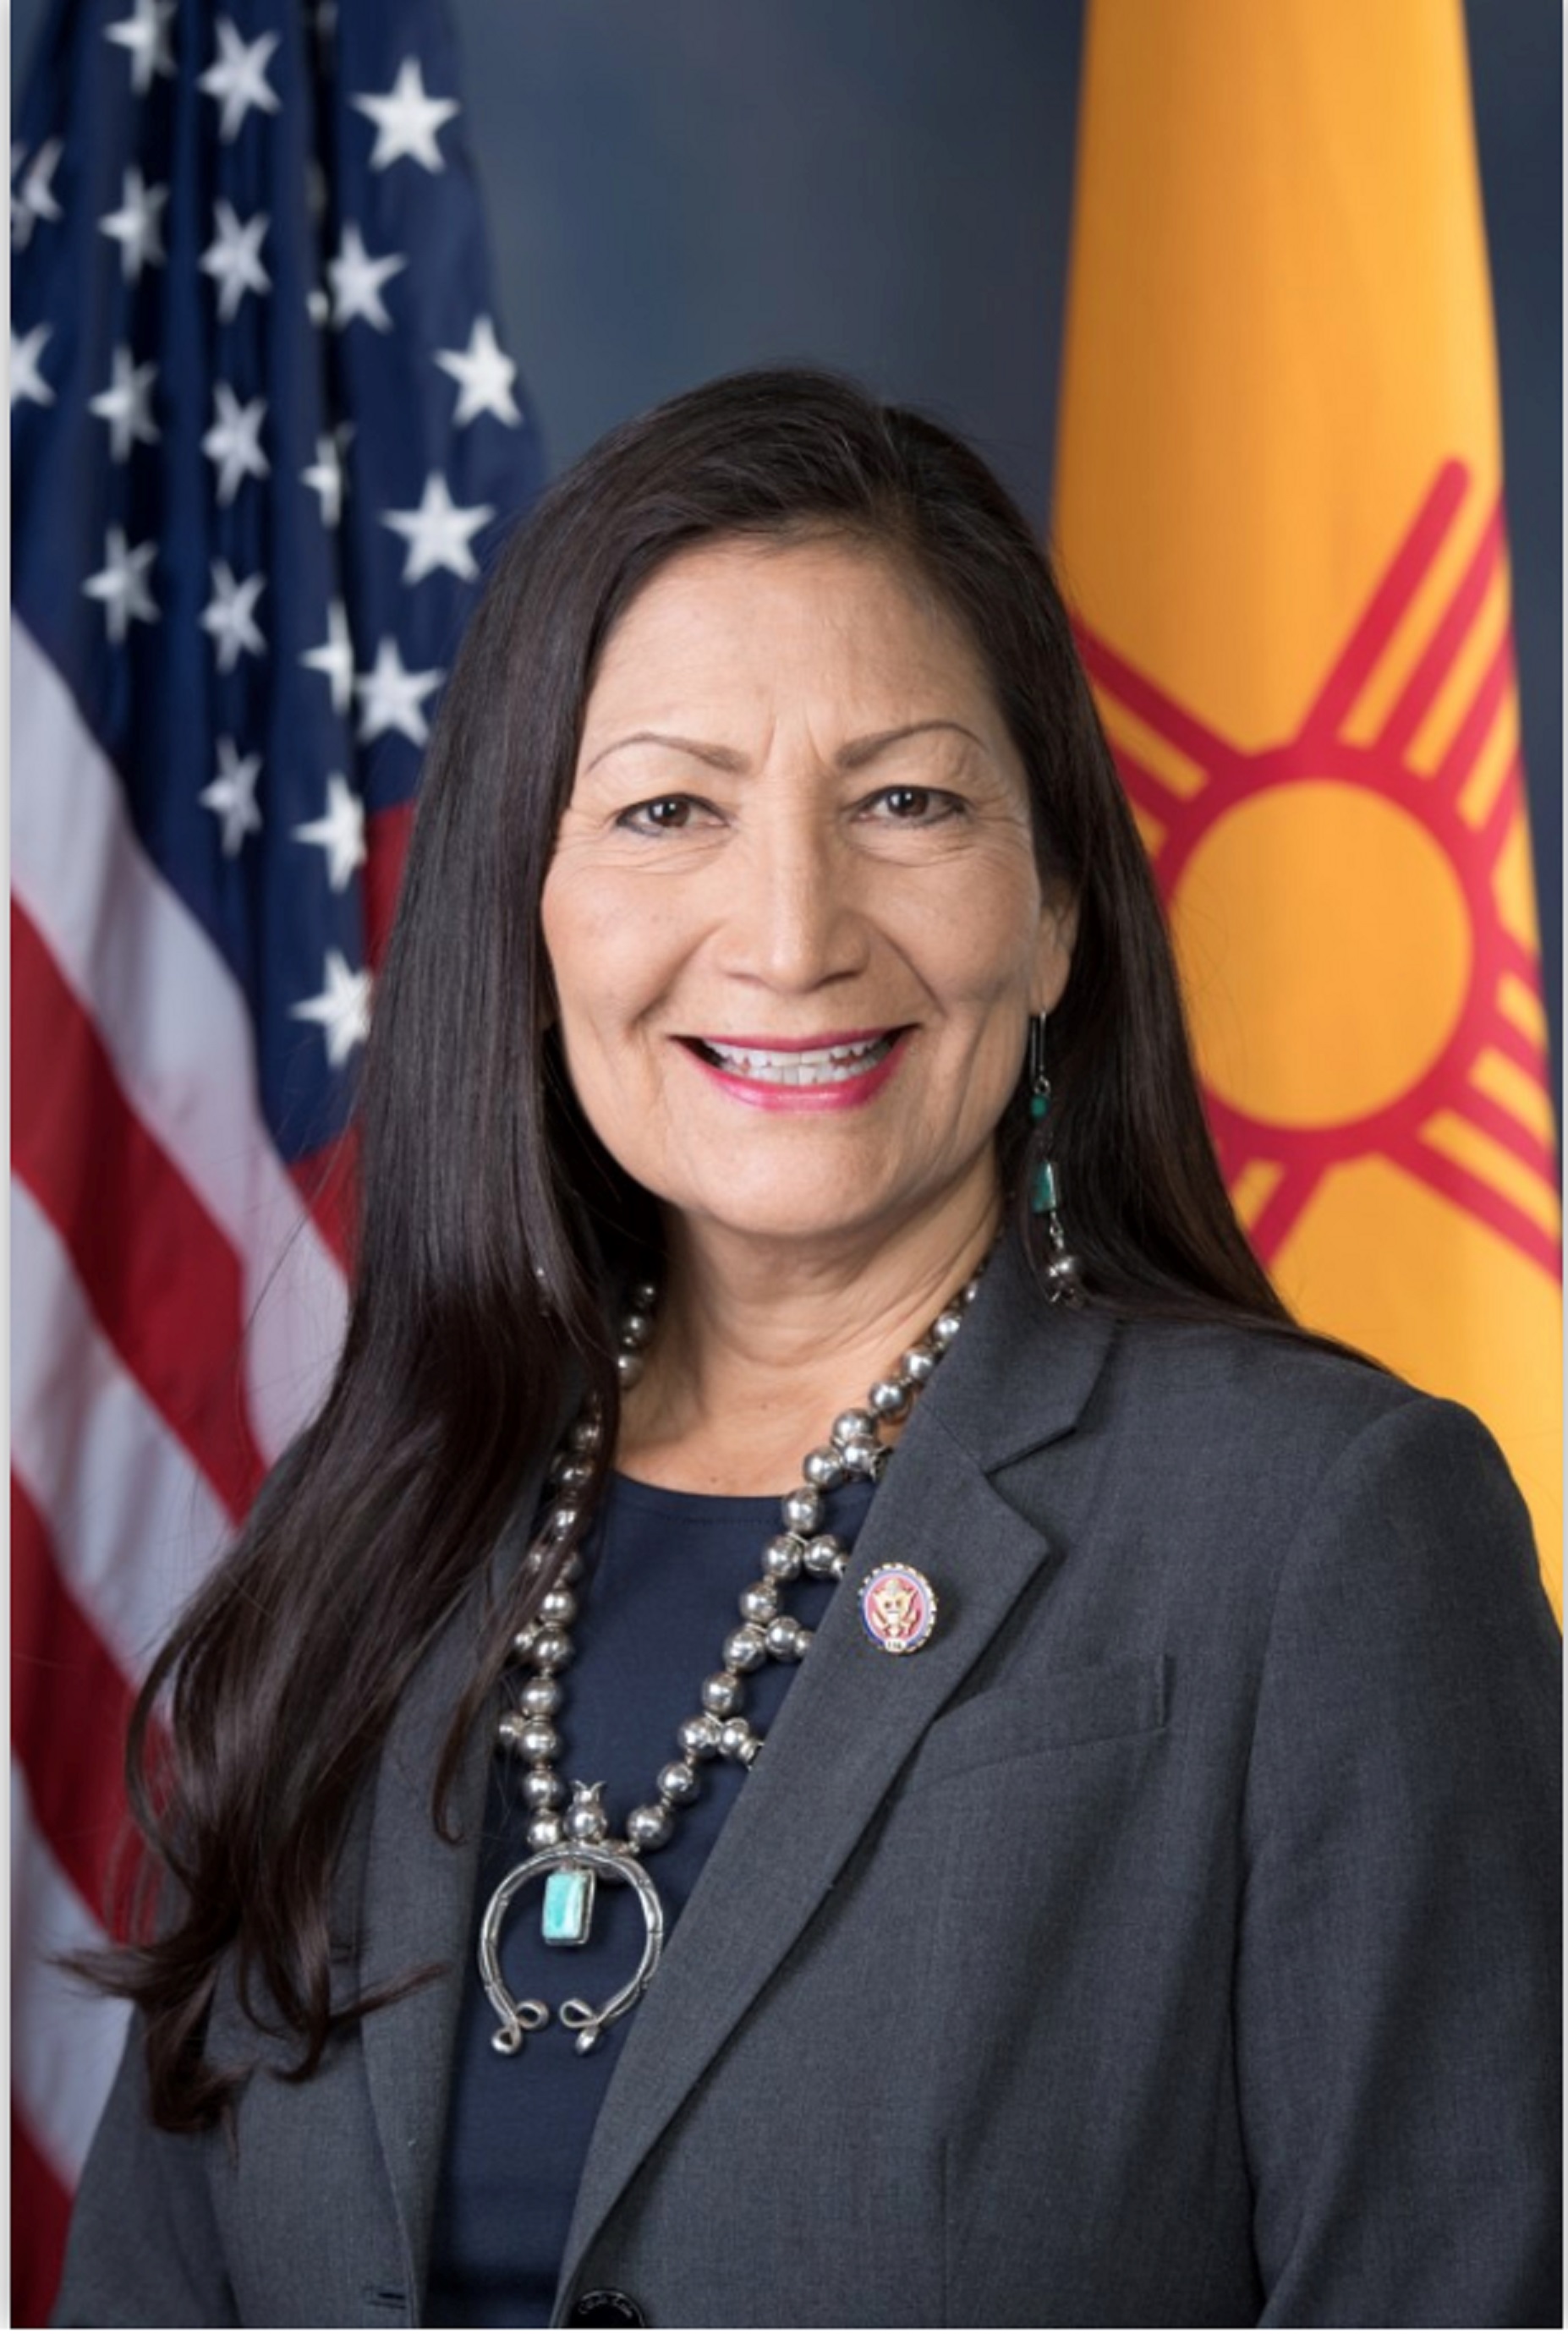 Stand with pro-environment Indigenous cabinet nominee Deb Haaland